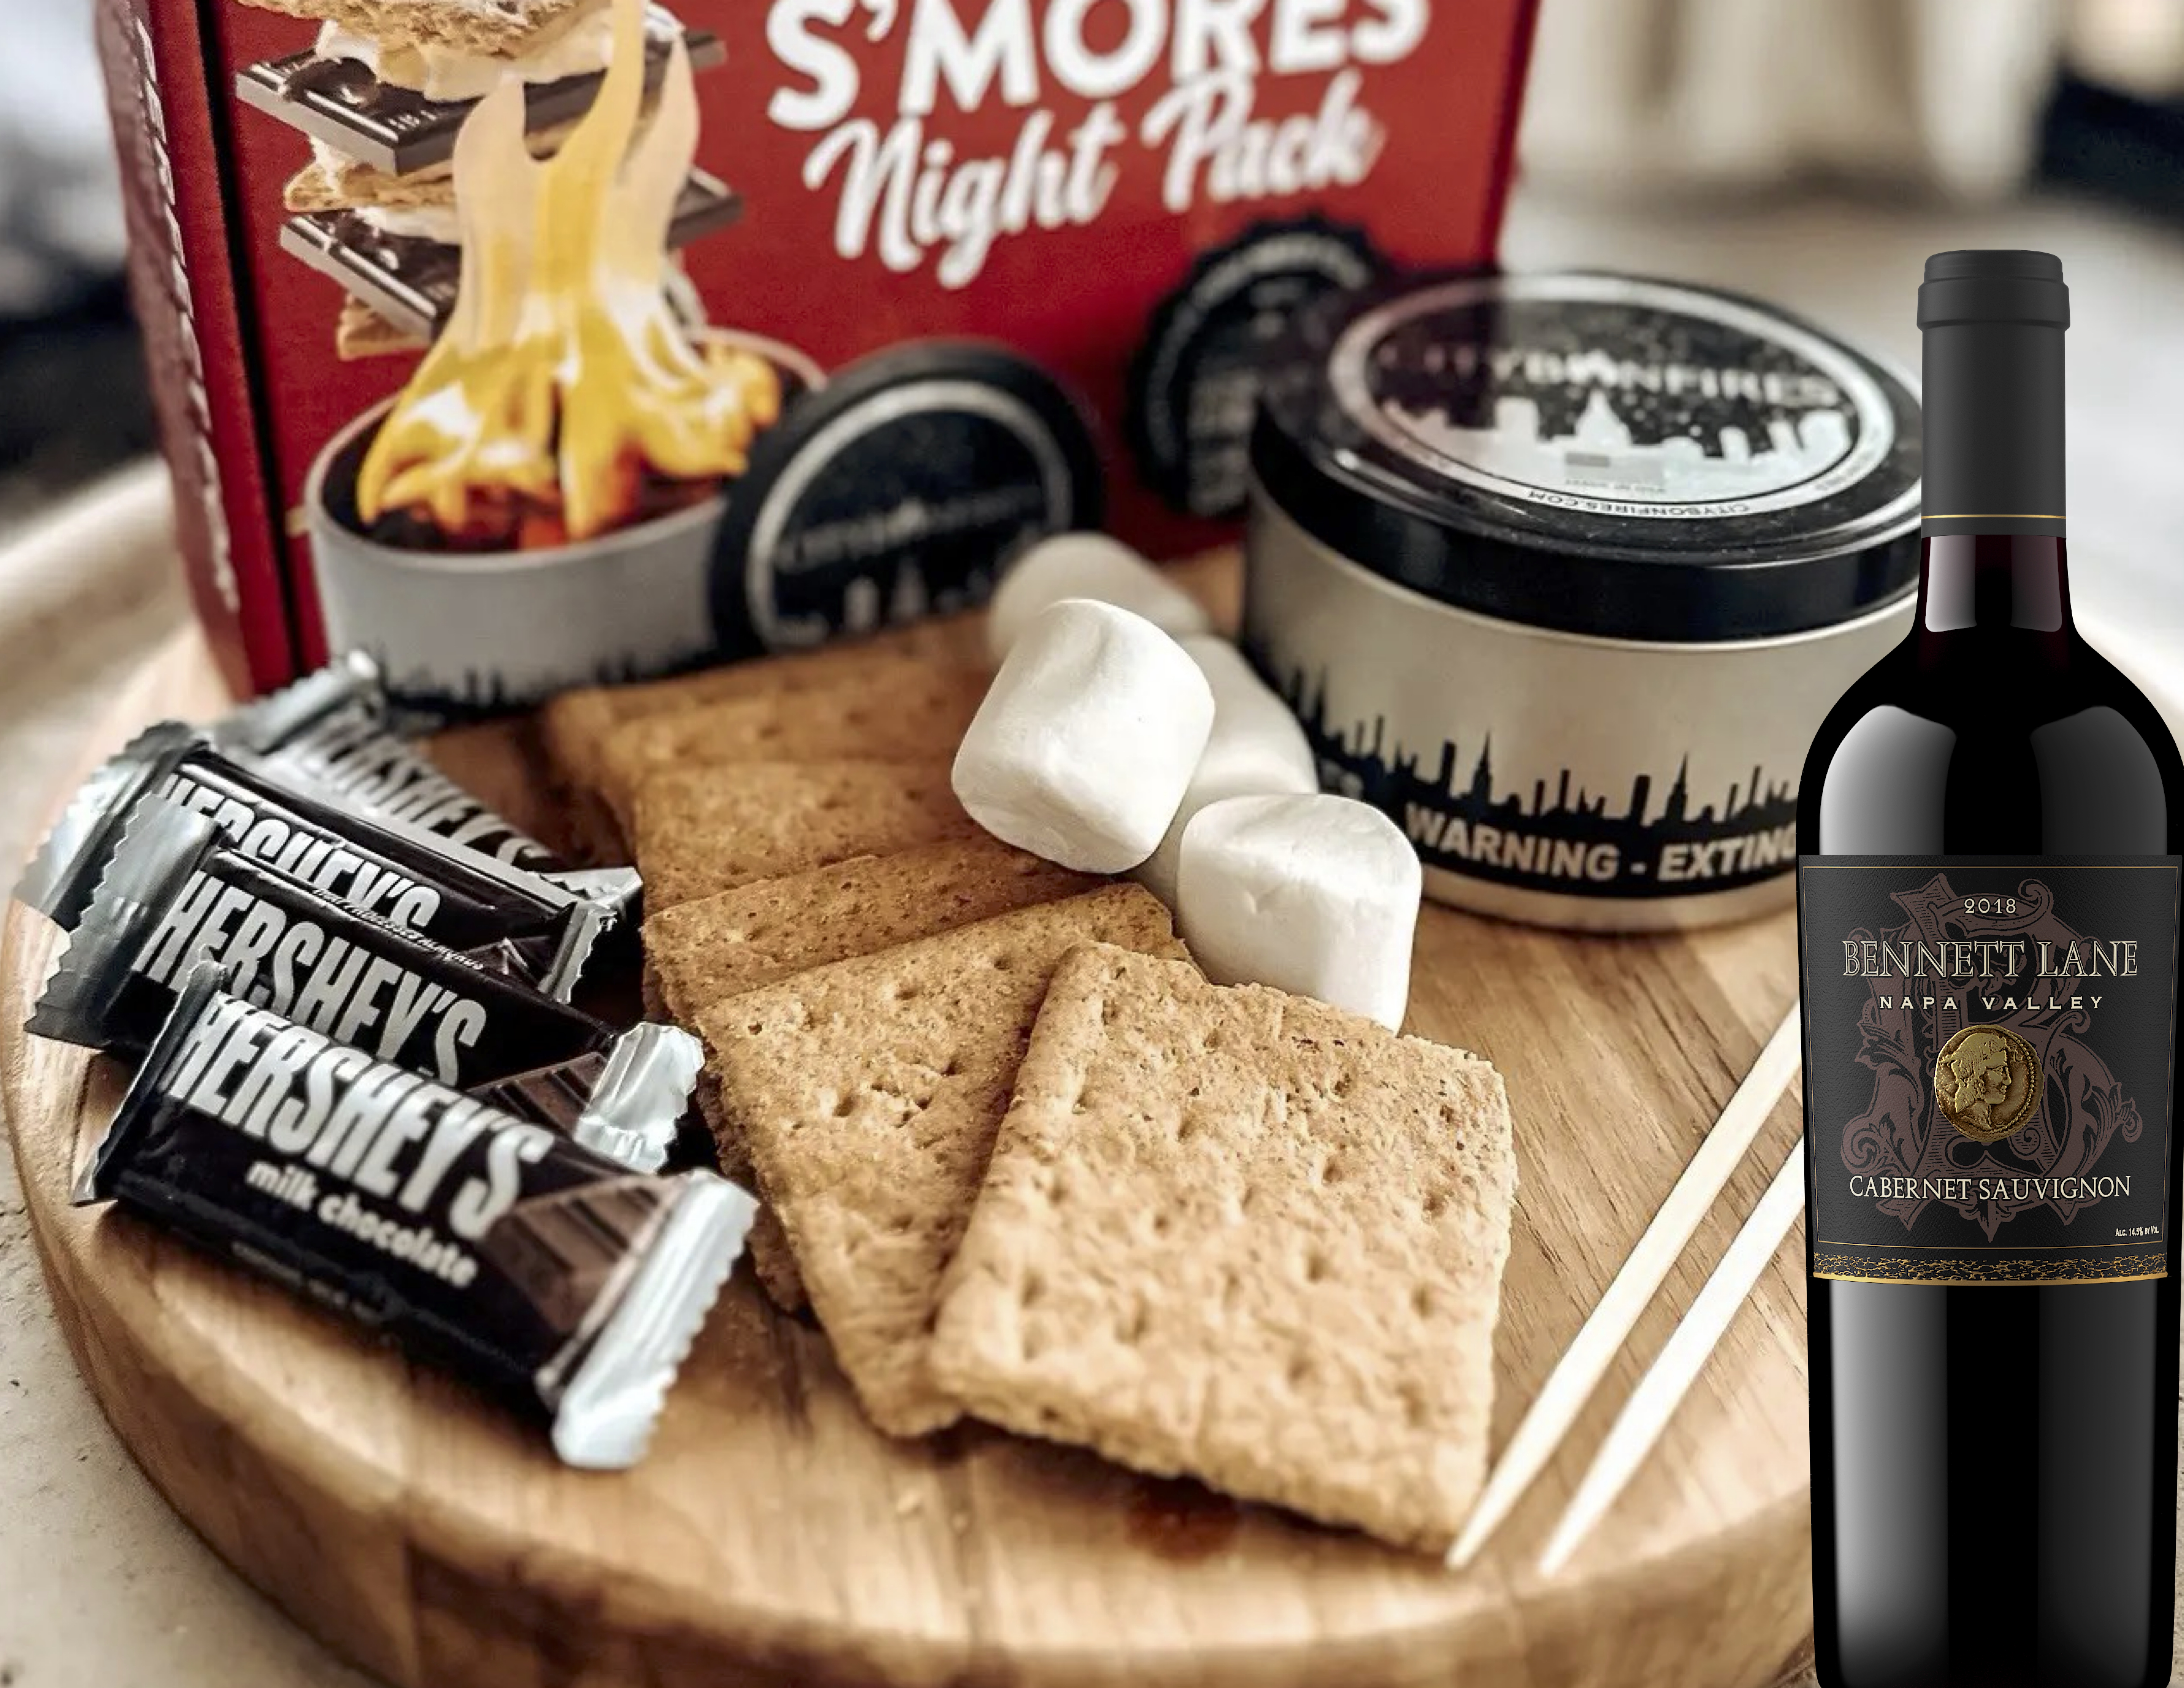 Product Image for S'mores Night Kit